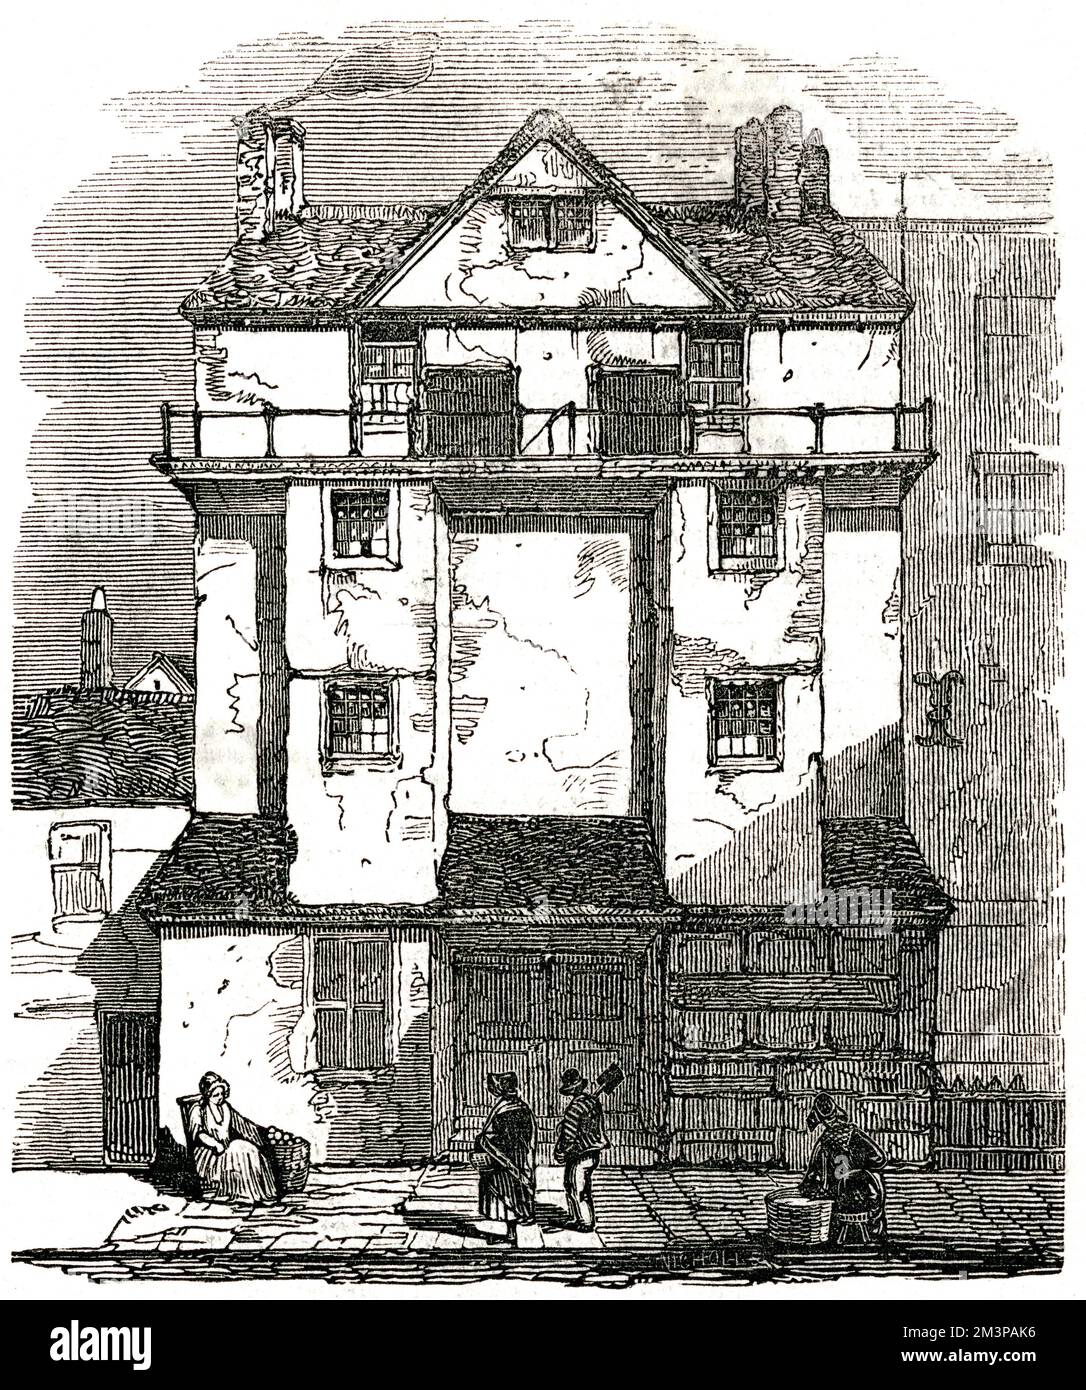 William Caxton's House - Almonry, Westminster, Londra Data: 1847 Foto Stock